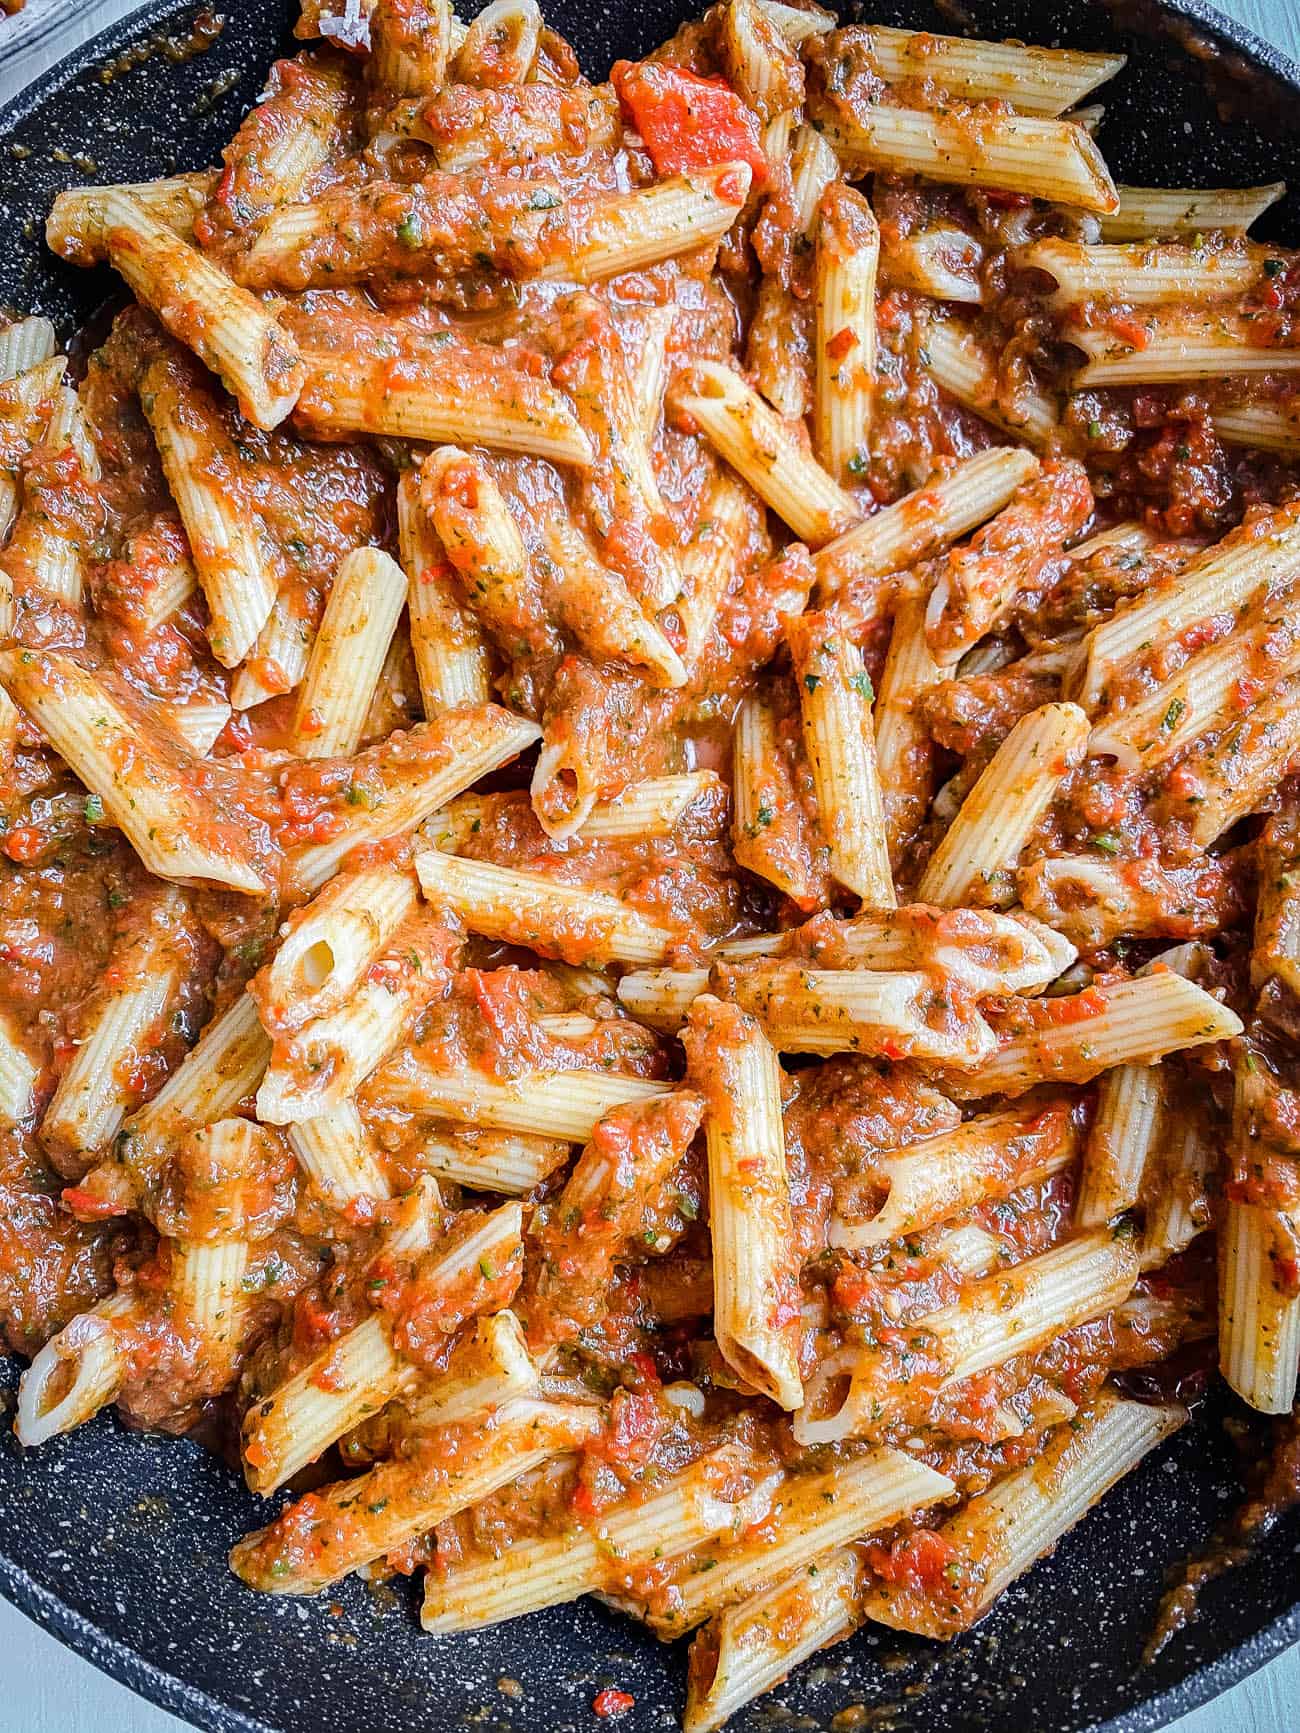 Red Lentil Pasta With Superfood Tomato Sauce | The Picky Eater